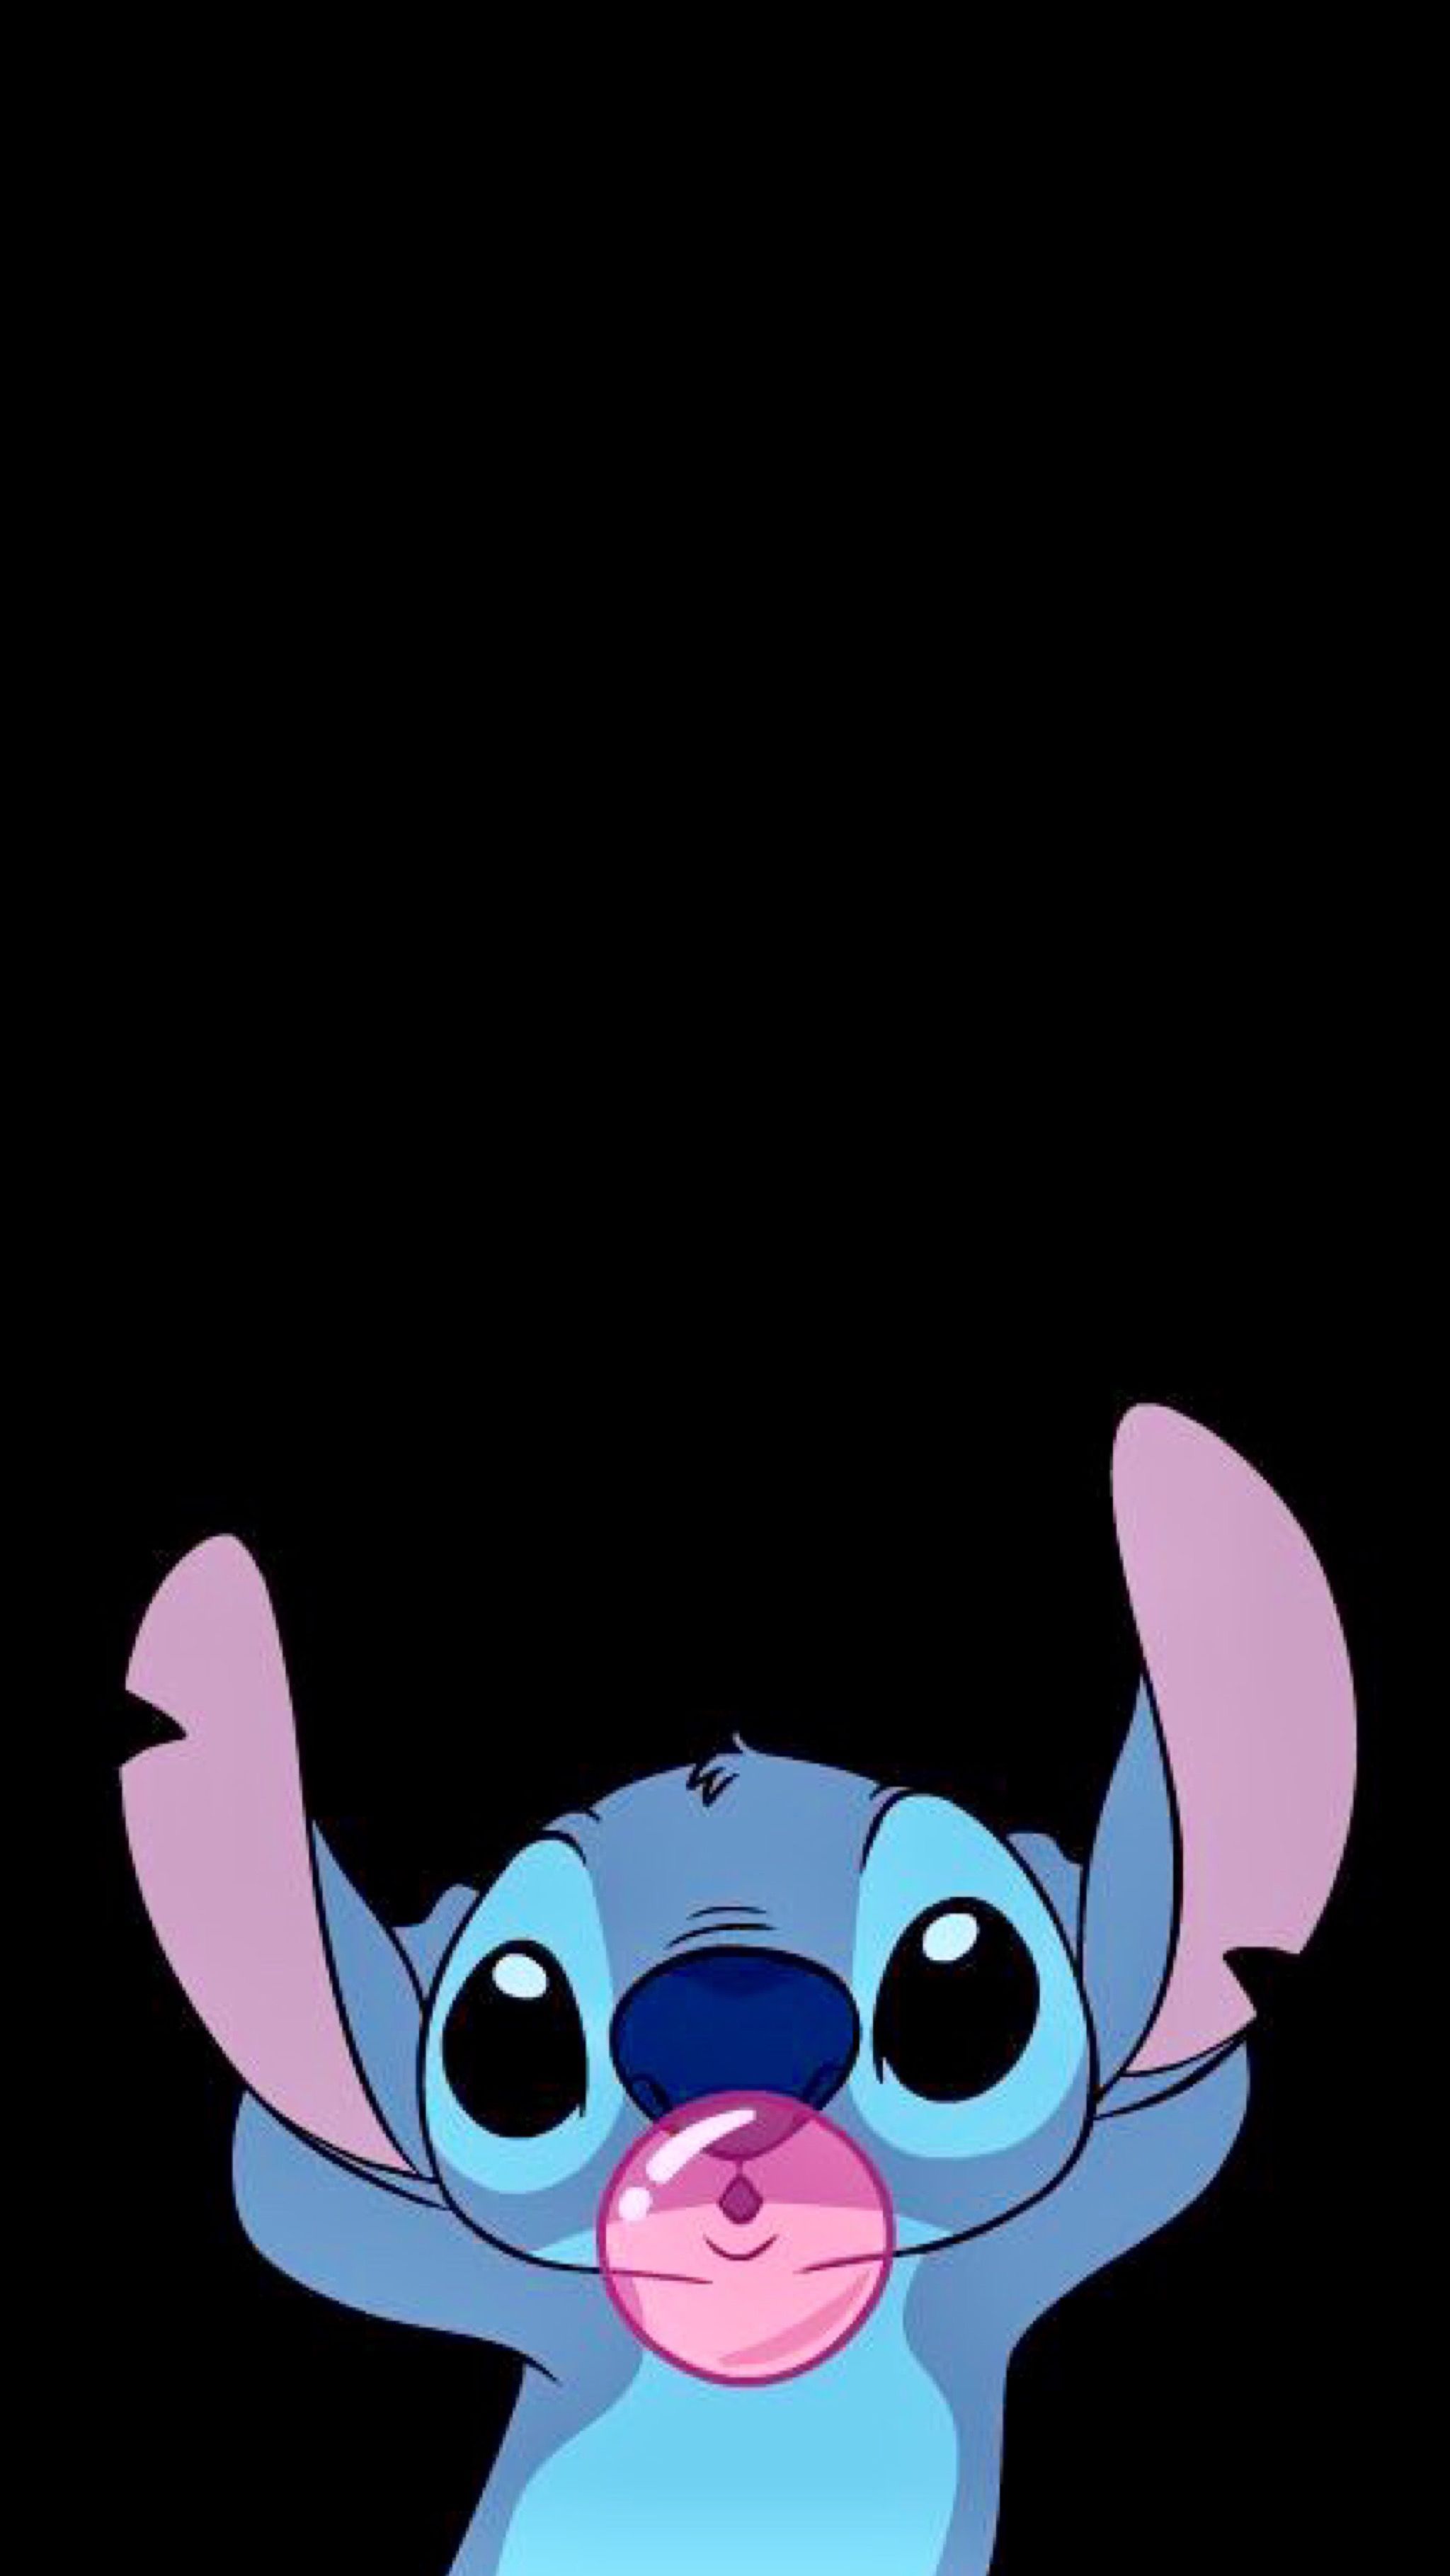 Stitch wallpaper from lelo and stitch for iphone 5  riWallpaper